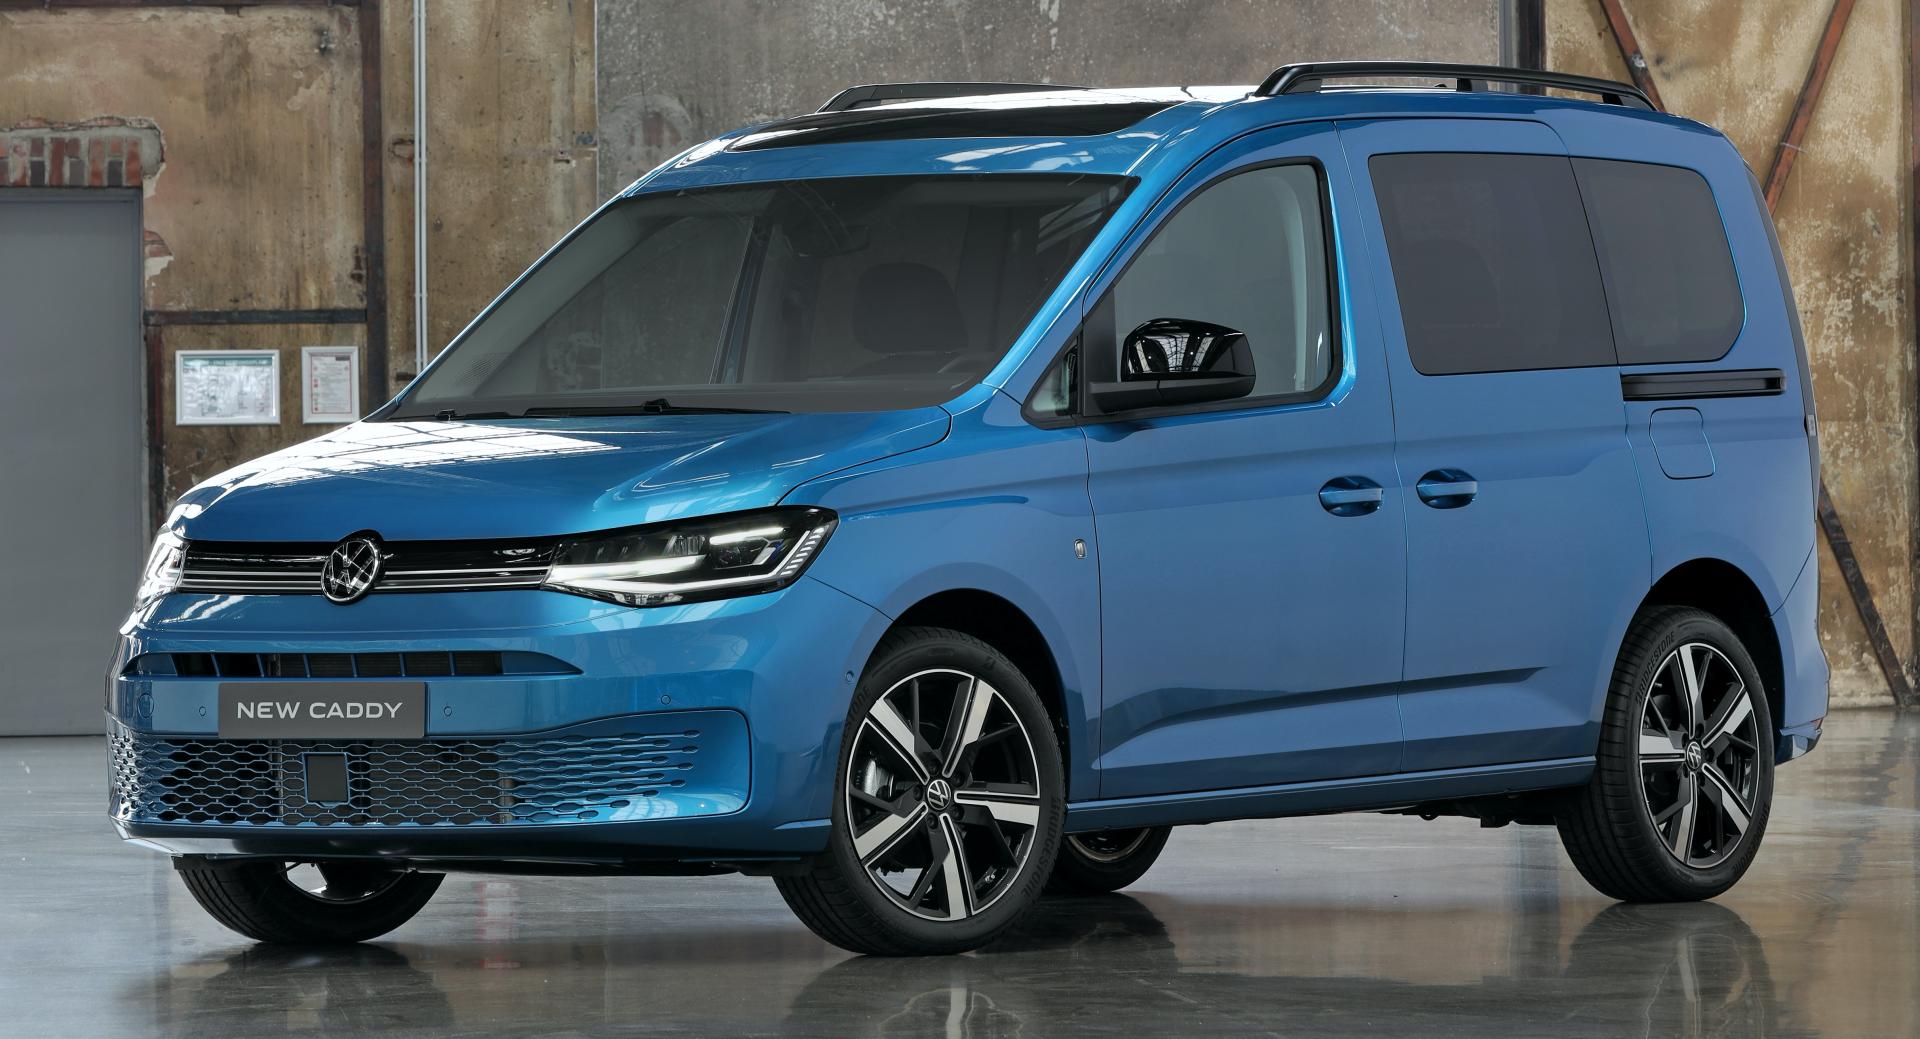 New 2021 VW Caddy Wraps MQB Underpinnings In Evolutionary Styling